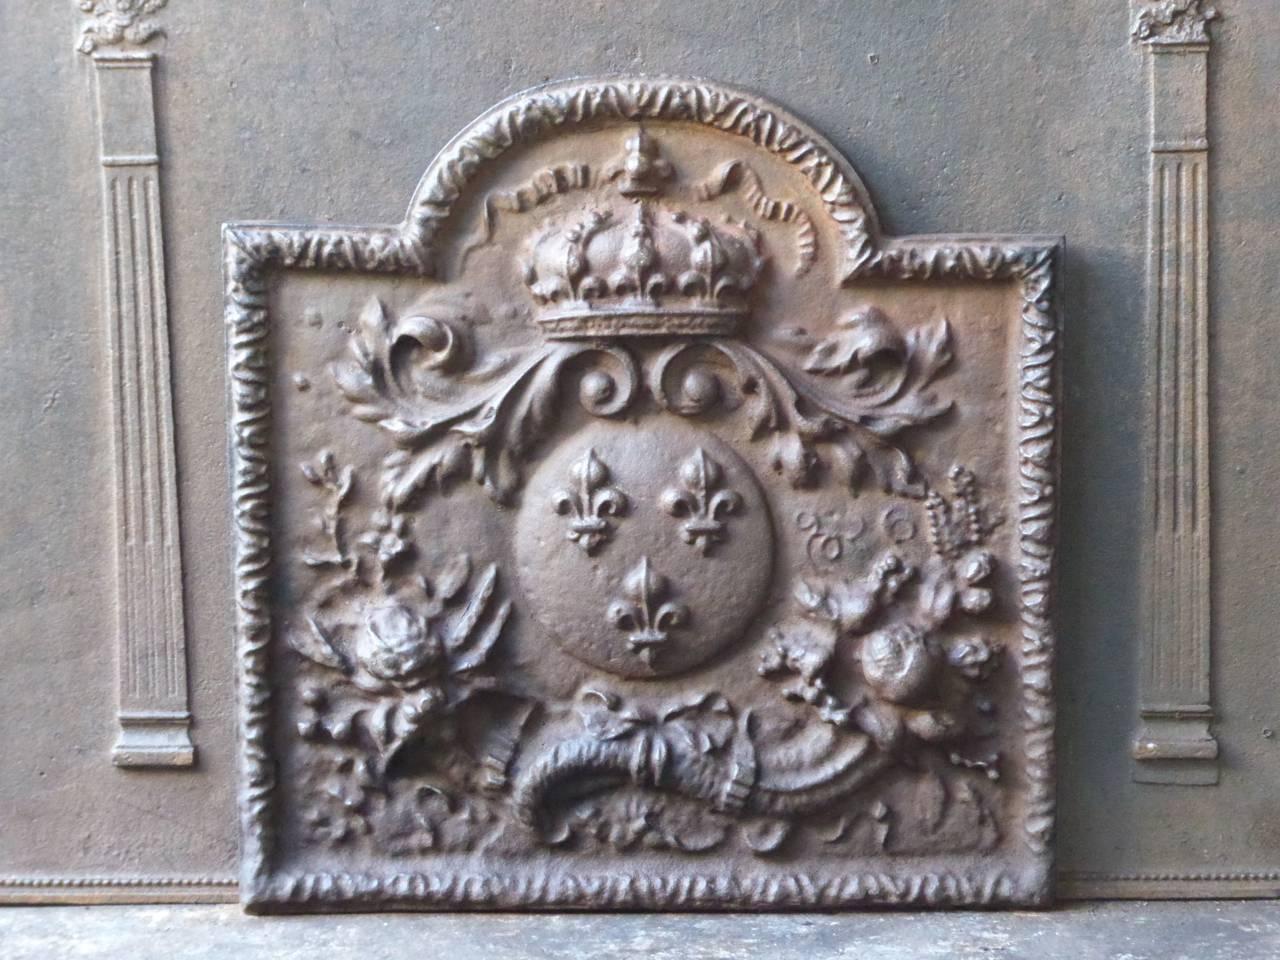 French fireplace fireback with the Arms of France.

Coat of arms of the House of Bourbon, an originally French royal house that became a major dynasty in Europe. It delivered kings for Spain (Navarra), France, both Sicilies and Parma. Bourbon